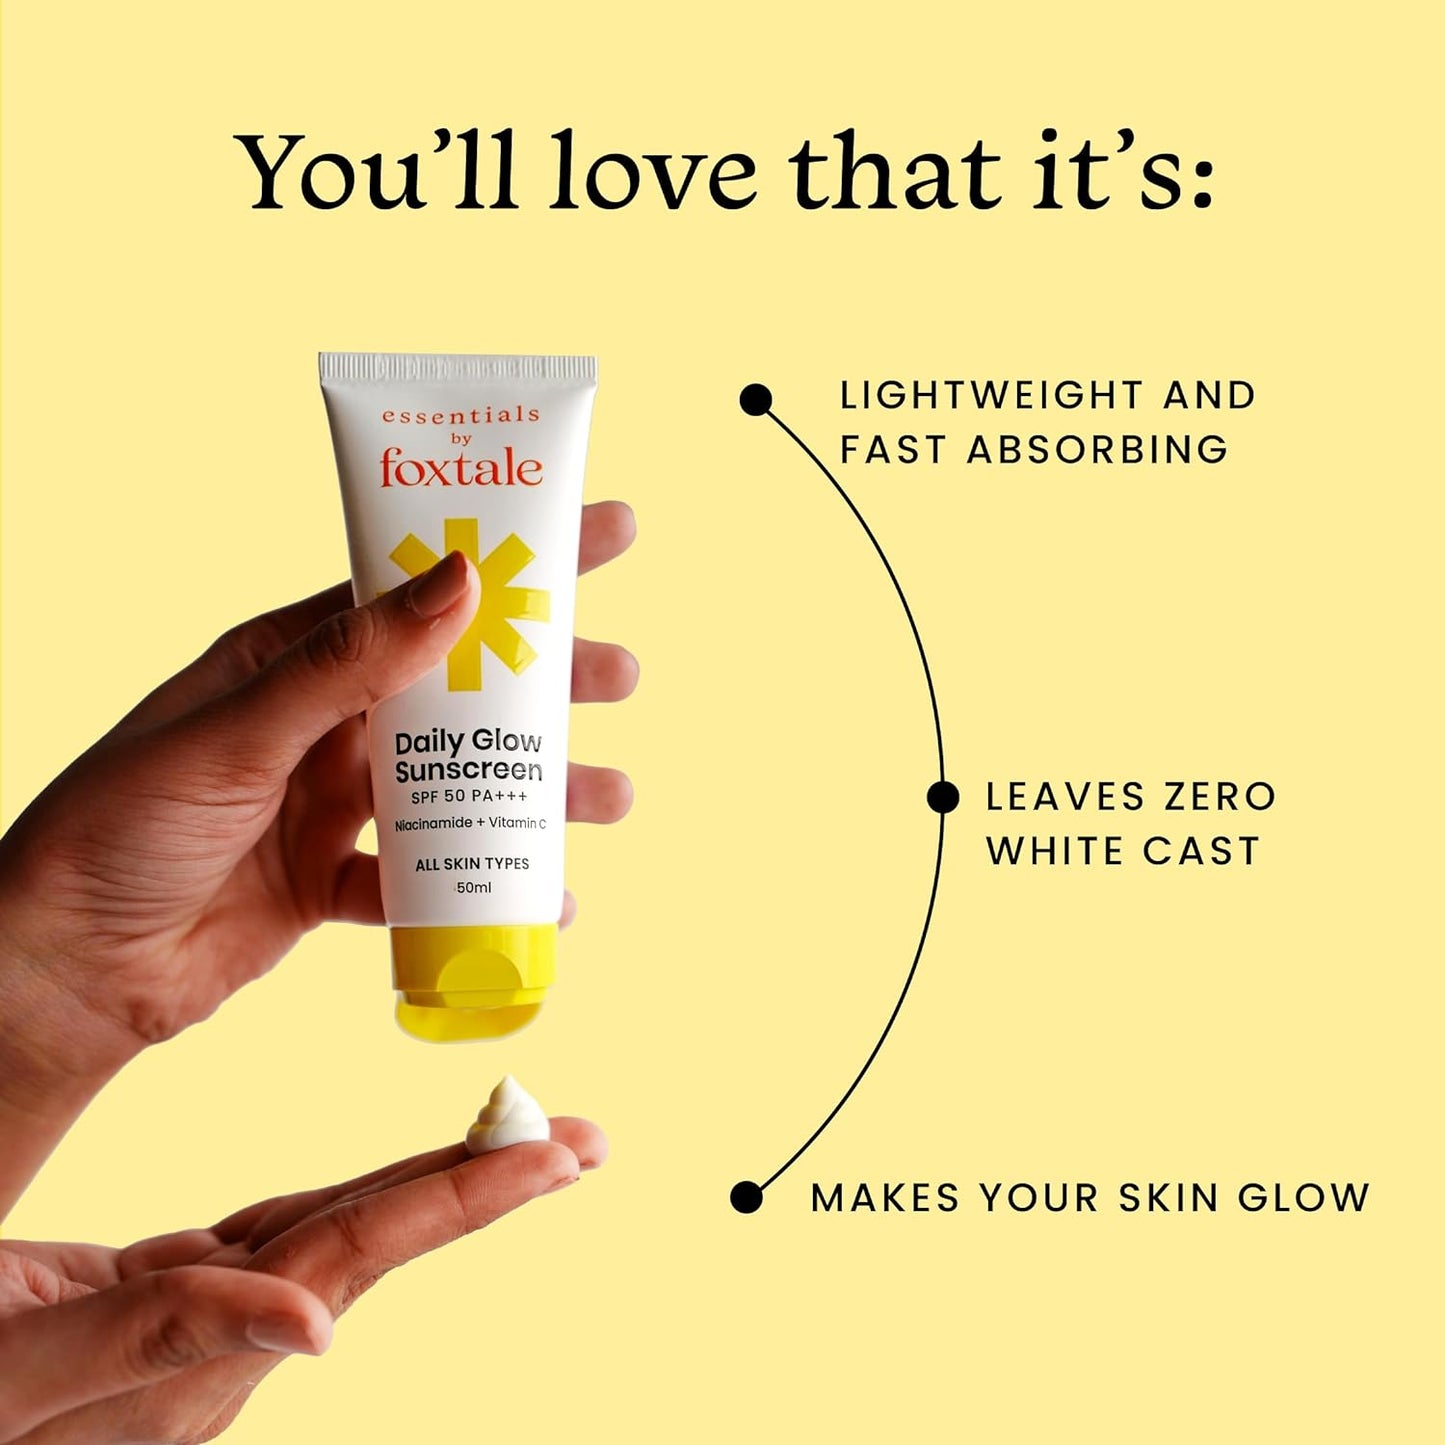 Foxtale Daily Glow Sunscreen SPF 50 PA+++ with Vitamin C -50ml